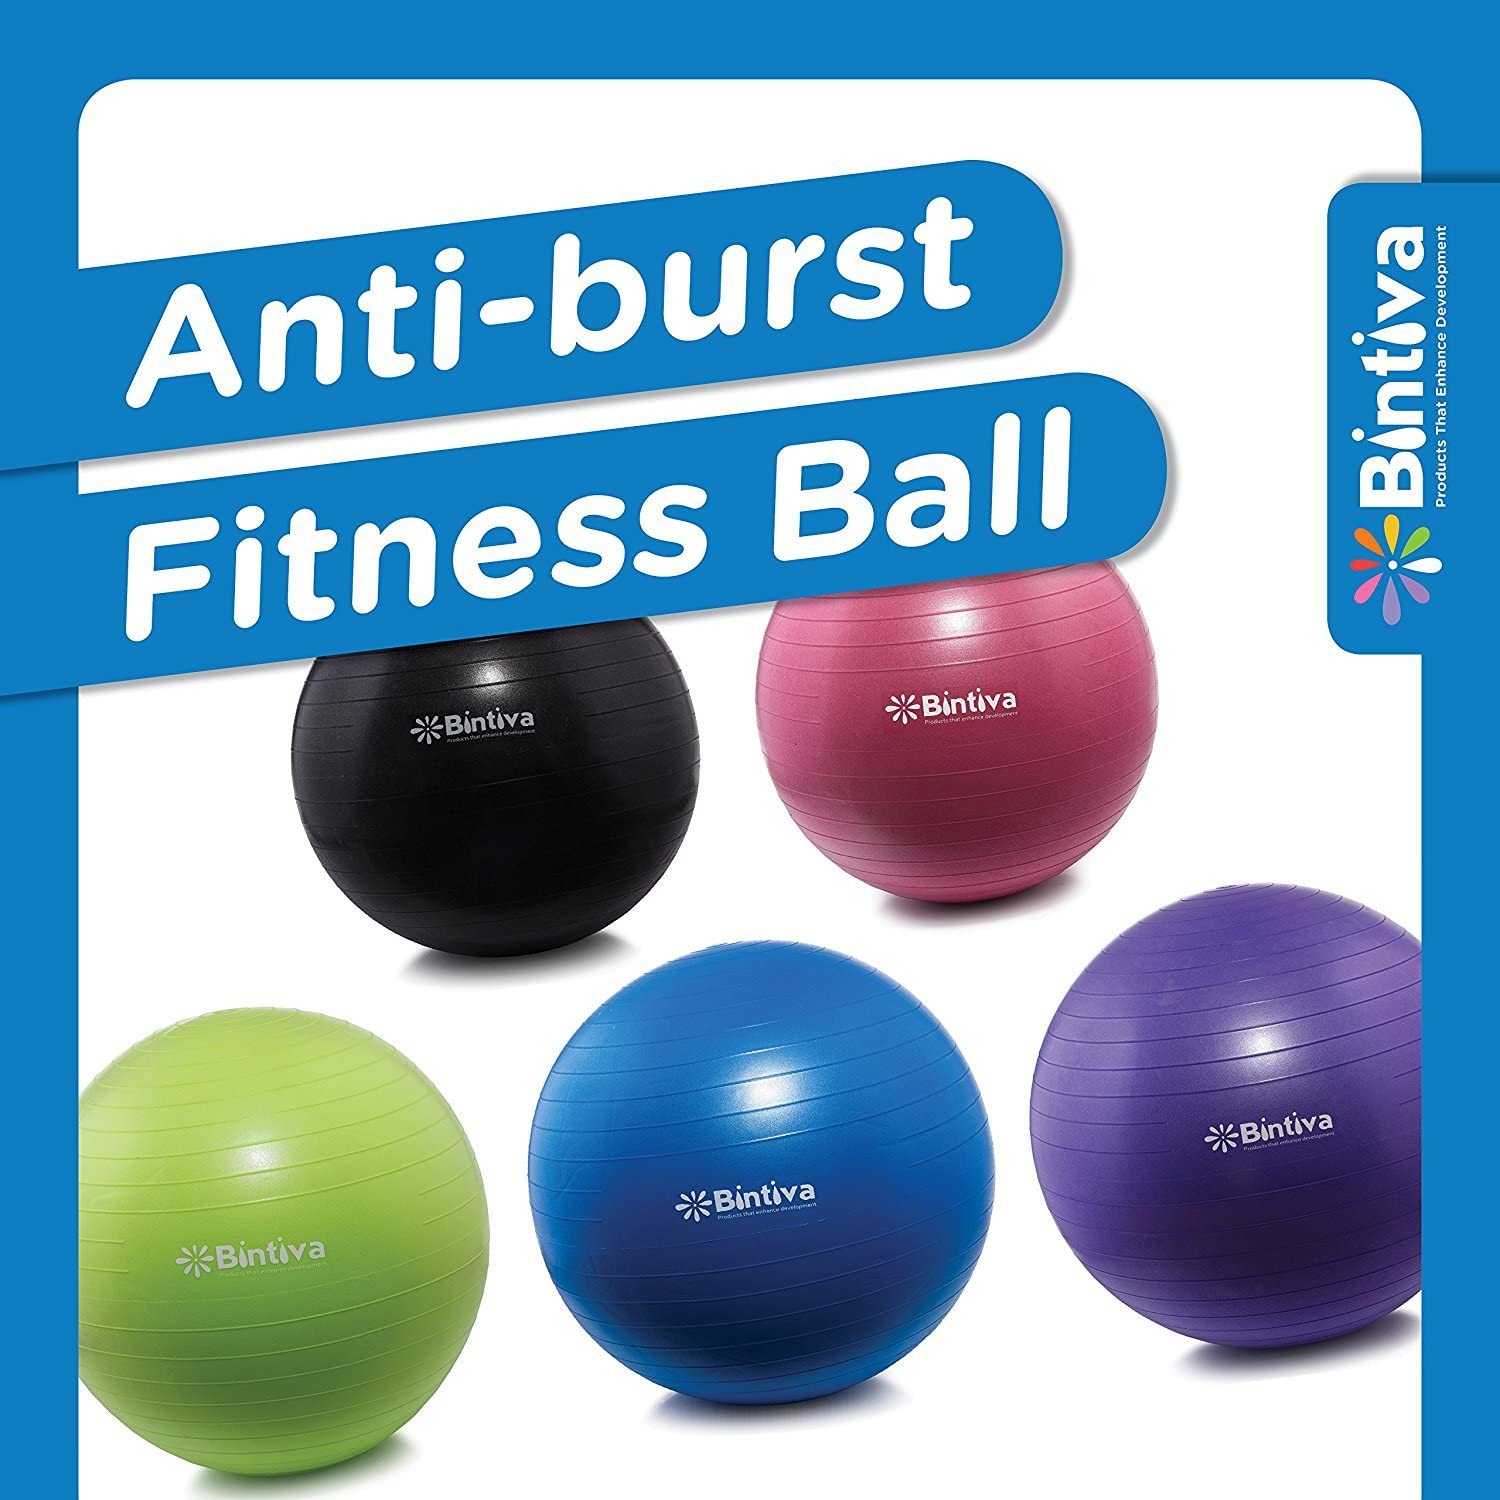 Anti-burst Exercise Ball for Fitness, Yoga, Labor, and Birthing - image 5 of 7